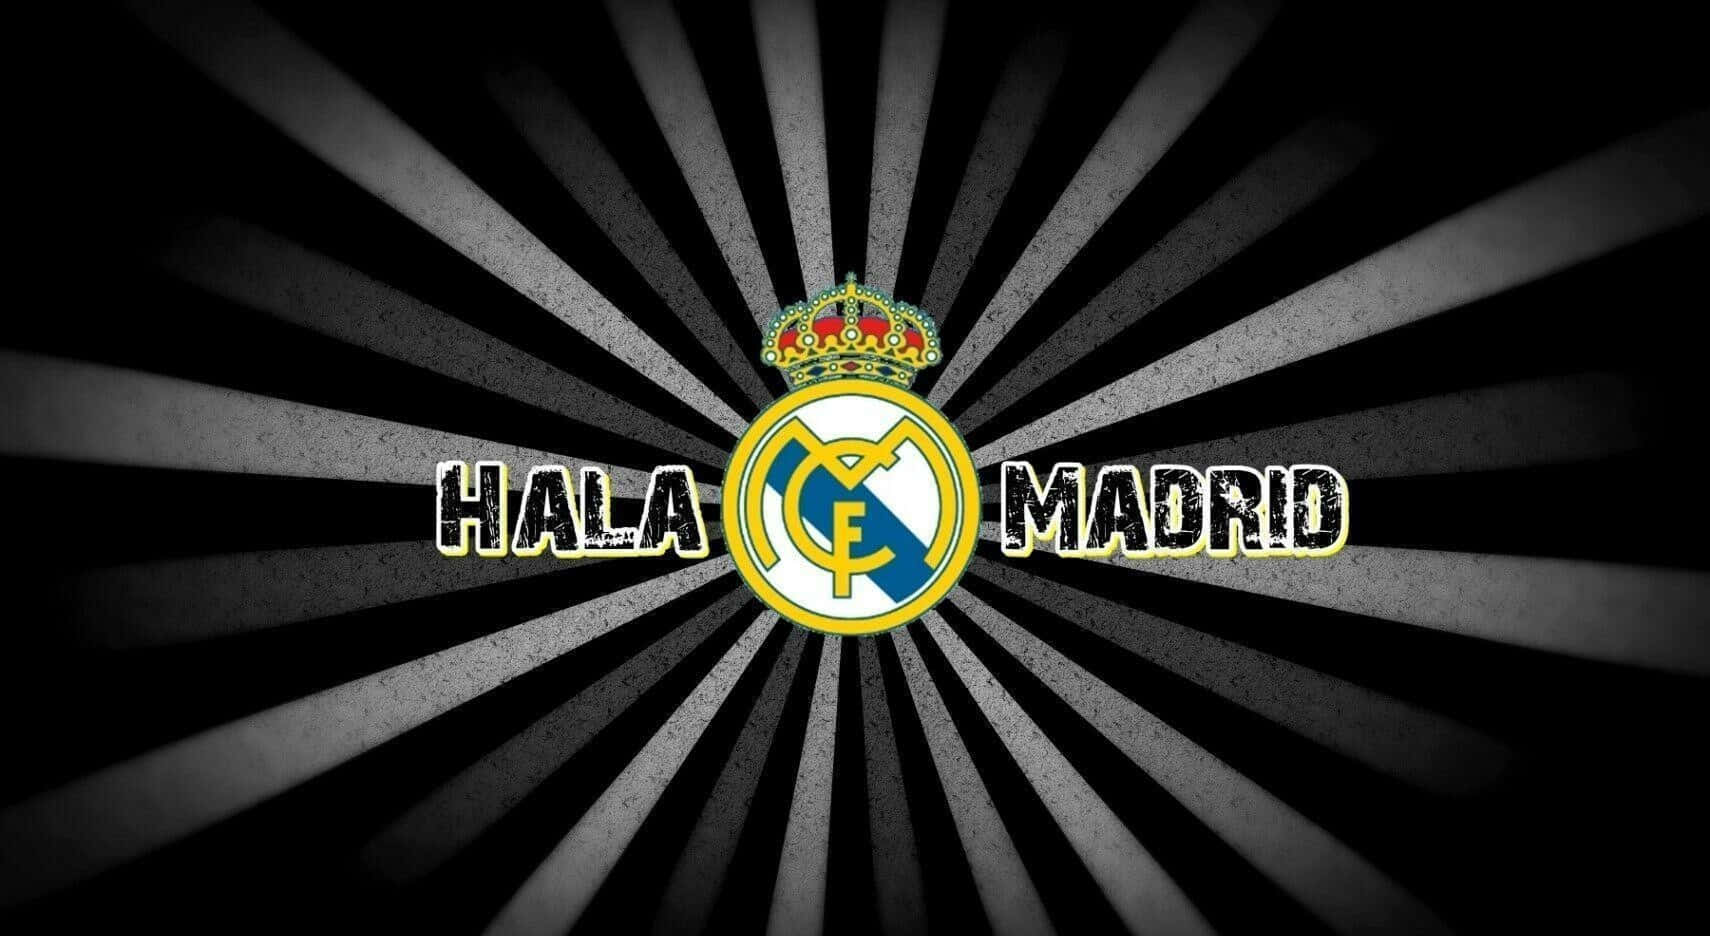 Real Madrid club crest with the message “Hala Madrid”